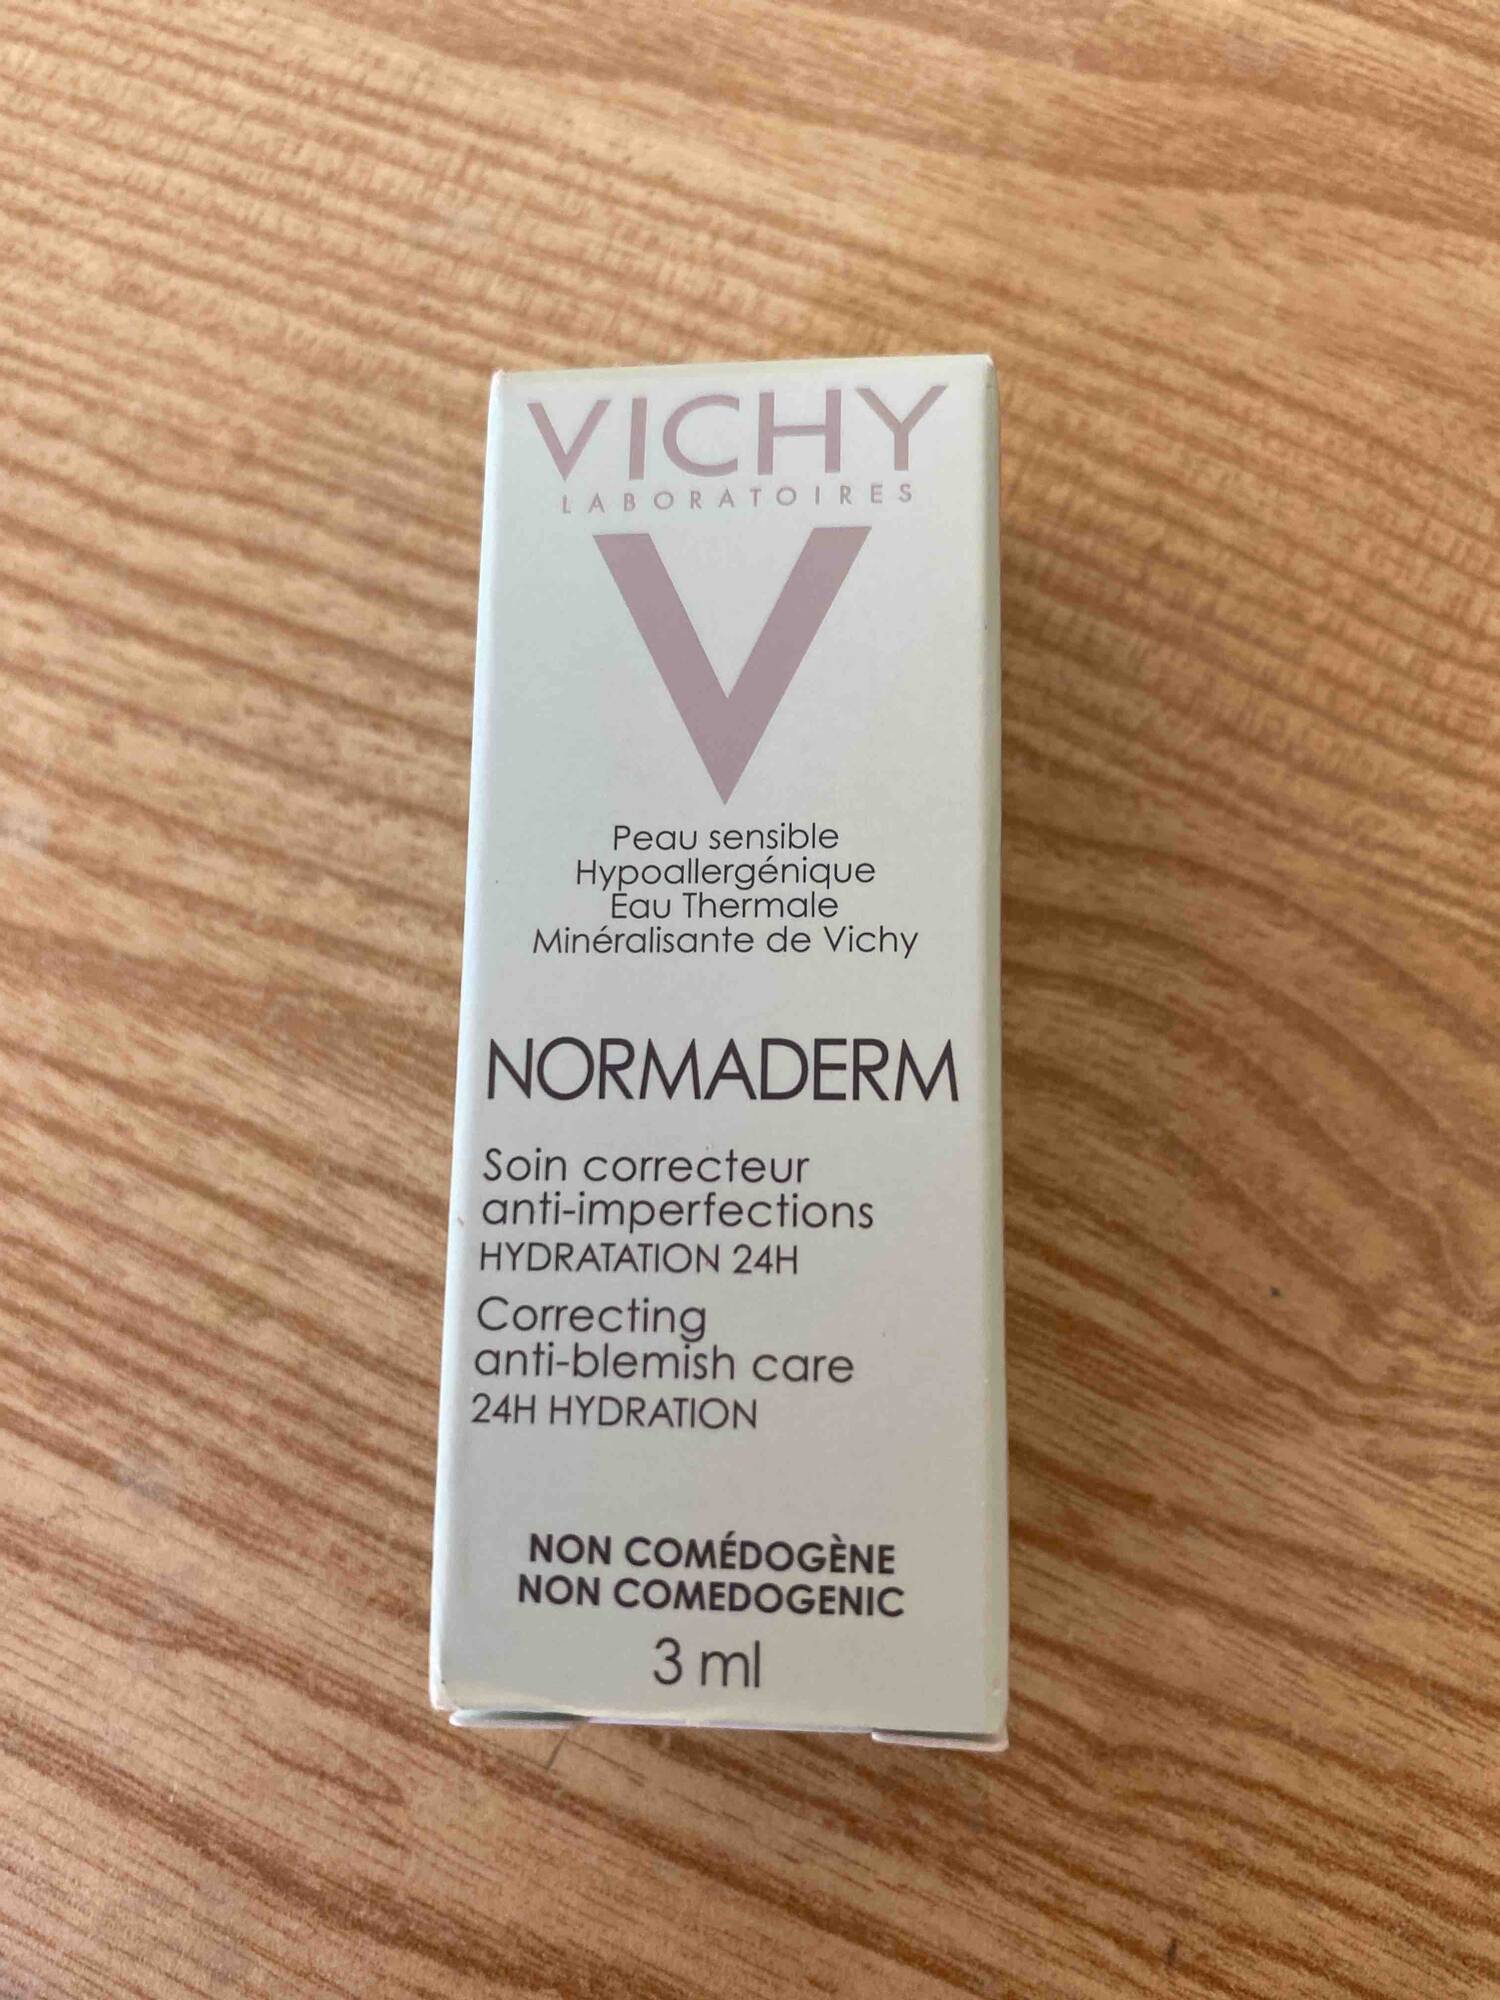 VICHY LABORATOIRES - Normaderm - Soin correcteur anti-imperfections hydratation 24h